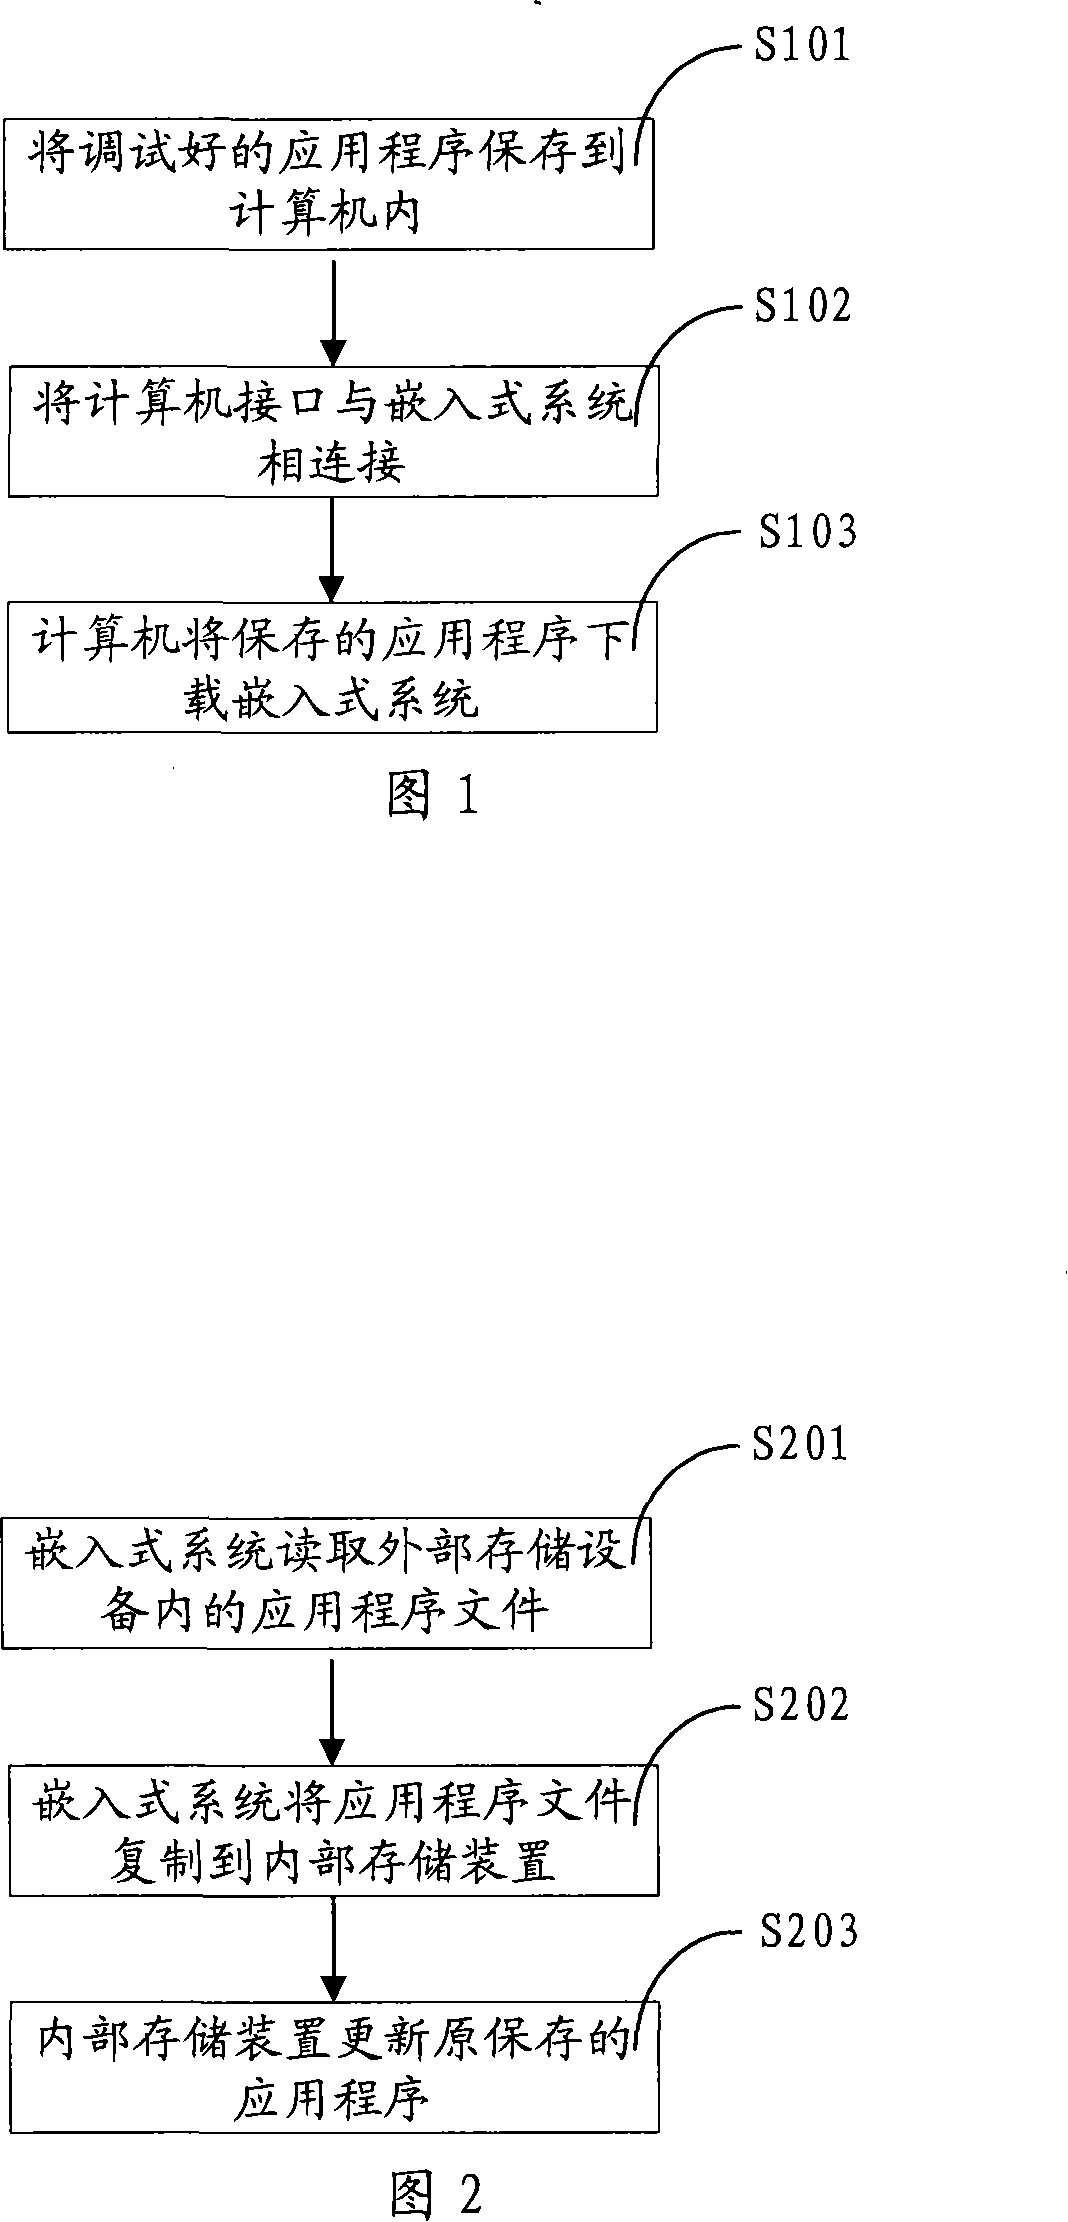 Embedded type system and method for renewing application program